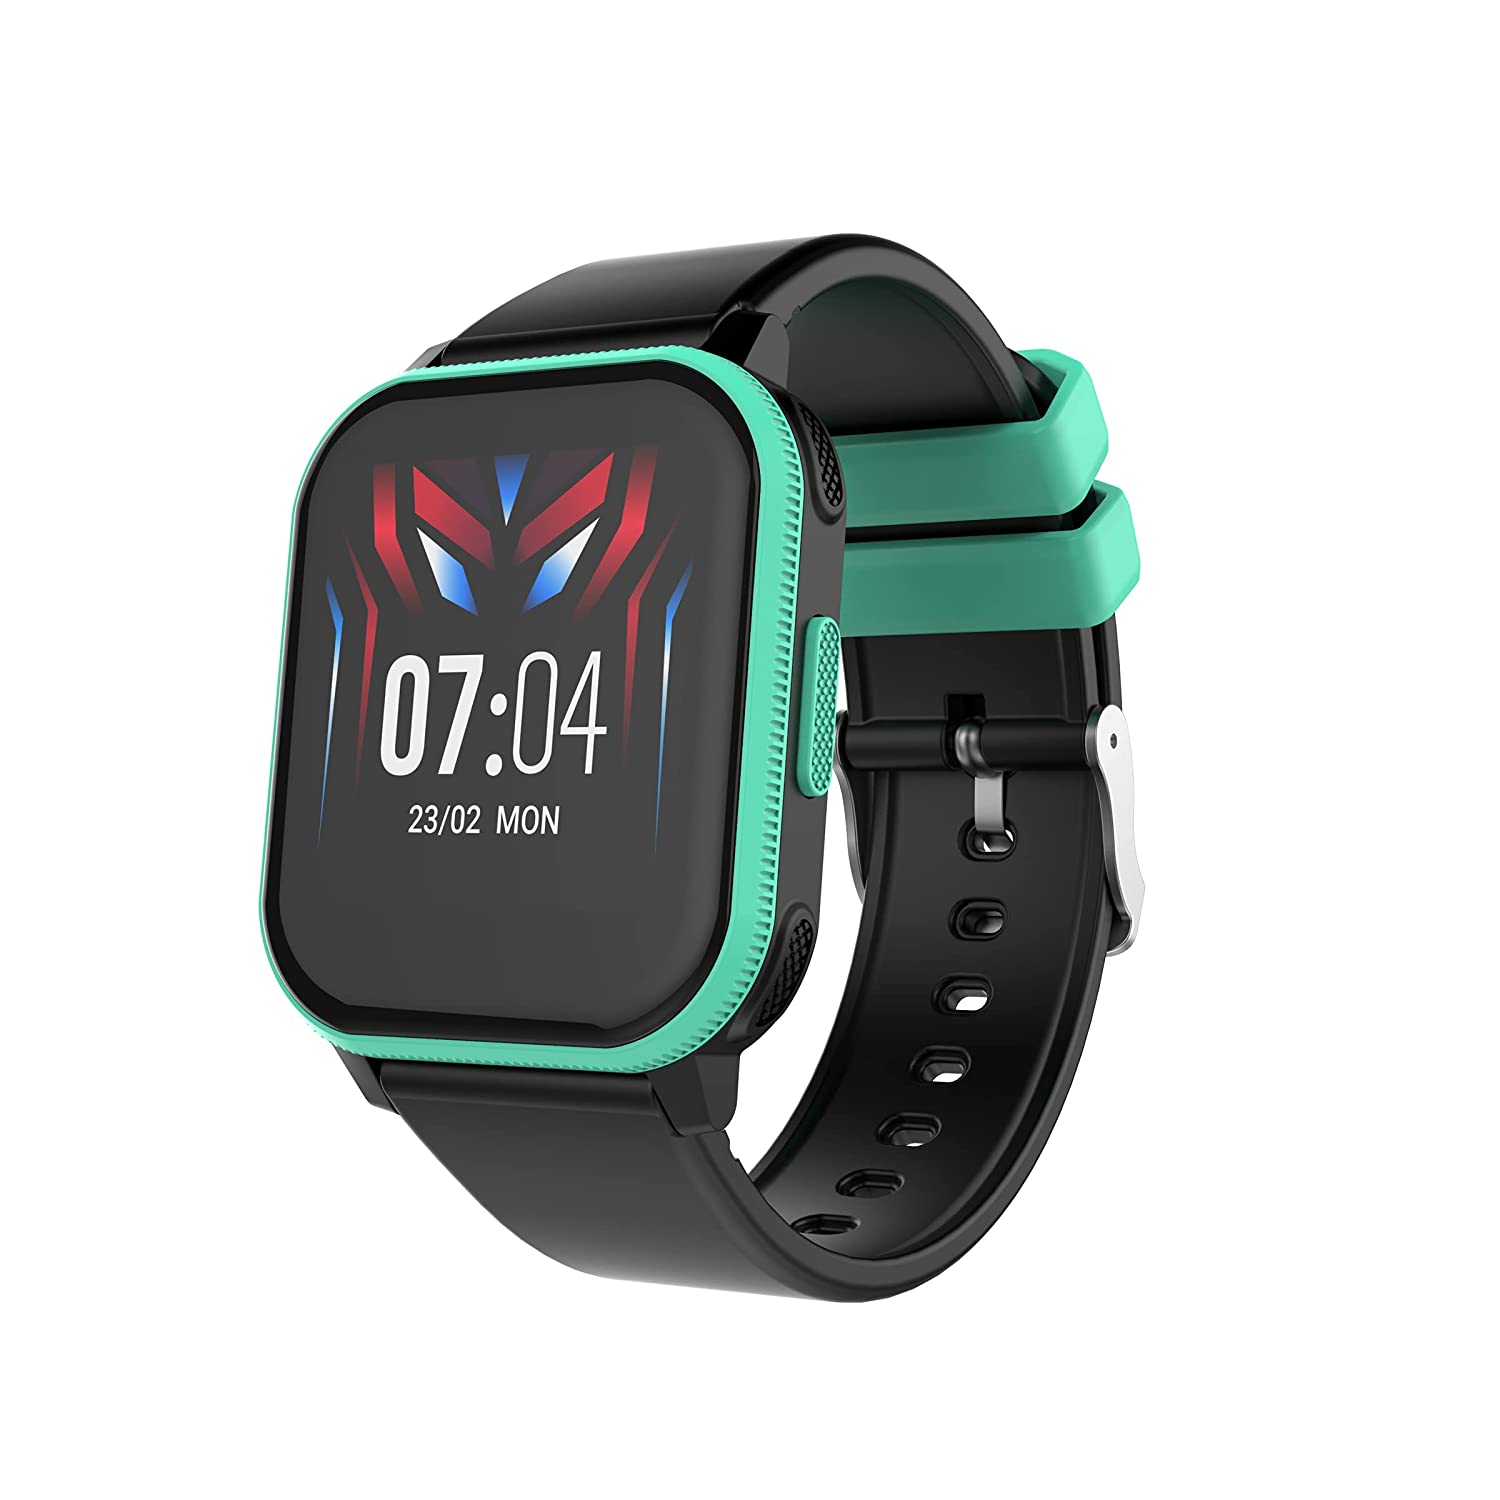 Dolchi PAU Y68 Smart Watches For All Smartphones Fitness Band Smartwatch  Price in India - Buy Dolchi PAU Y68 Smart Watches For All Smartphones  Fitness Band Smartwatch online at Flipkart.com